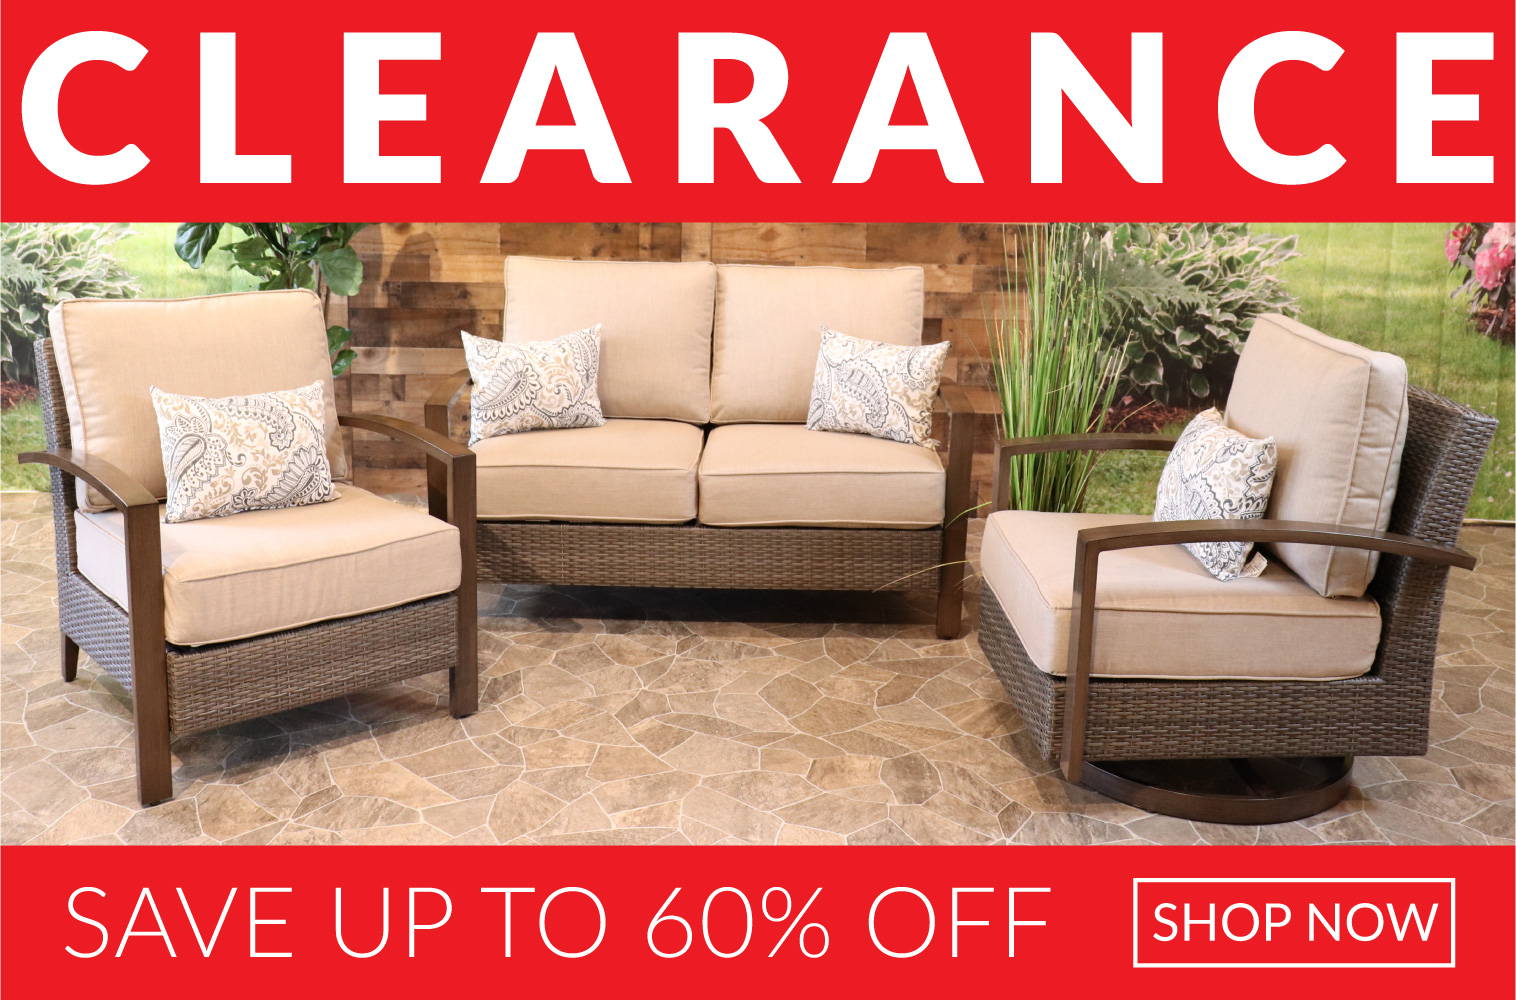 Clearance Sale Kennet Outdoor Seating Save up to 60% off